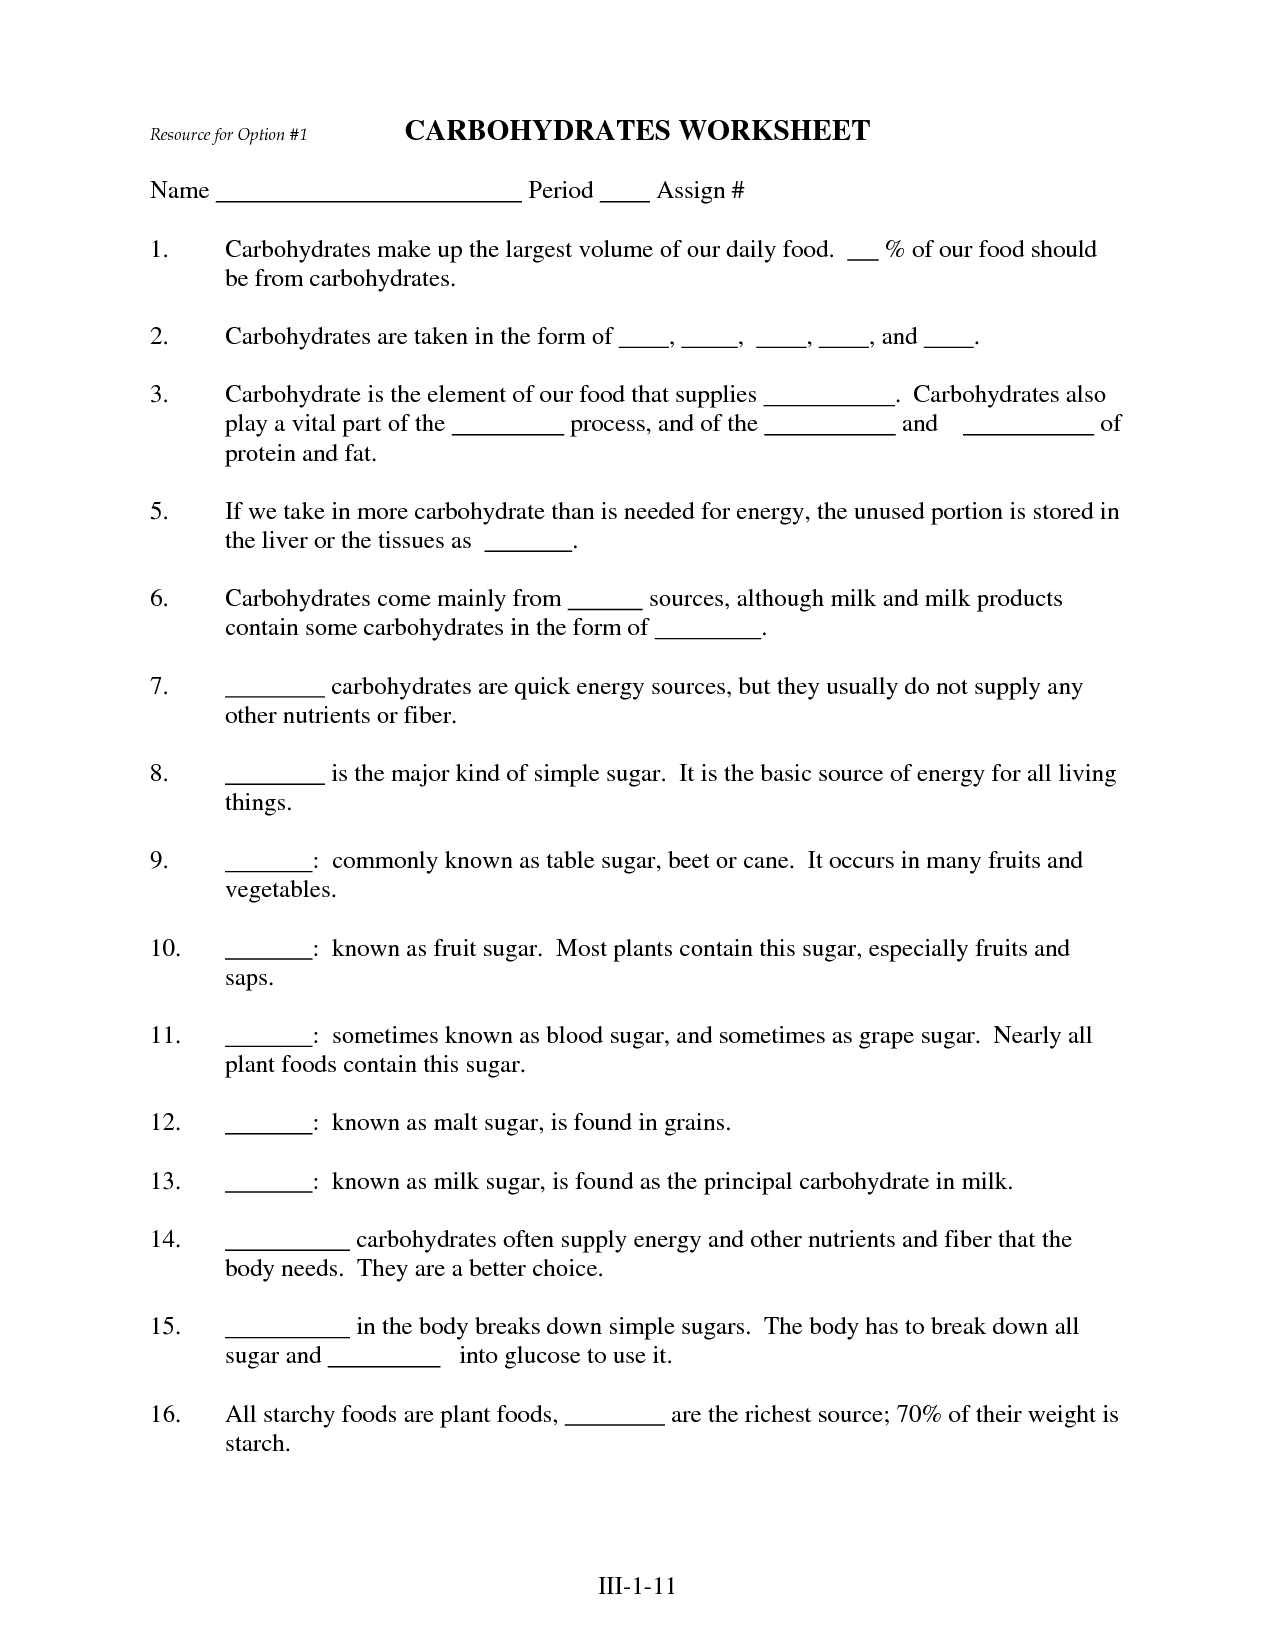 Carbohydrates Worksheet Answers Image